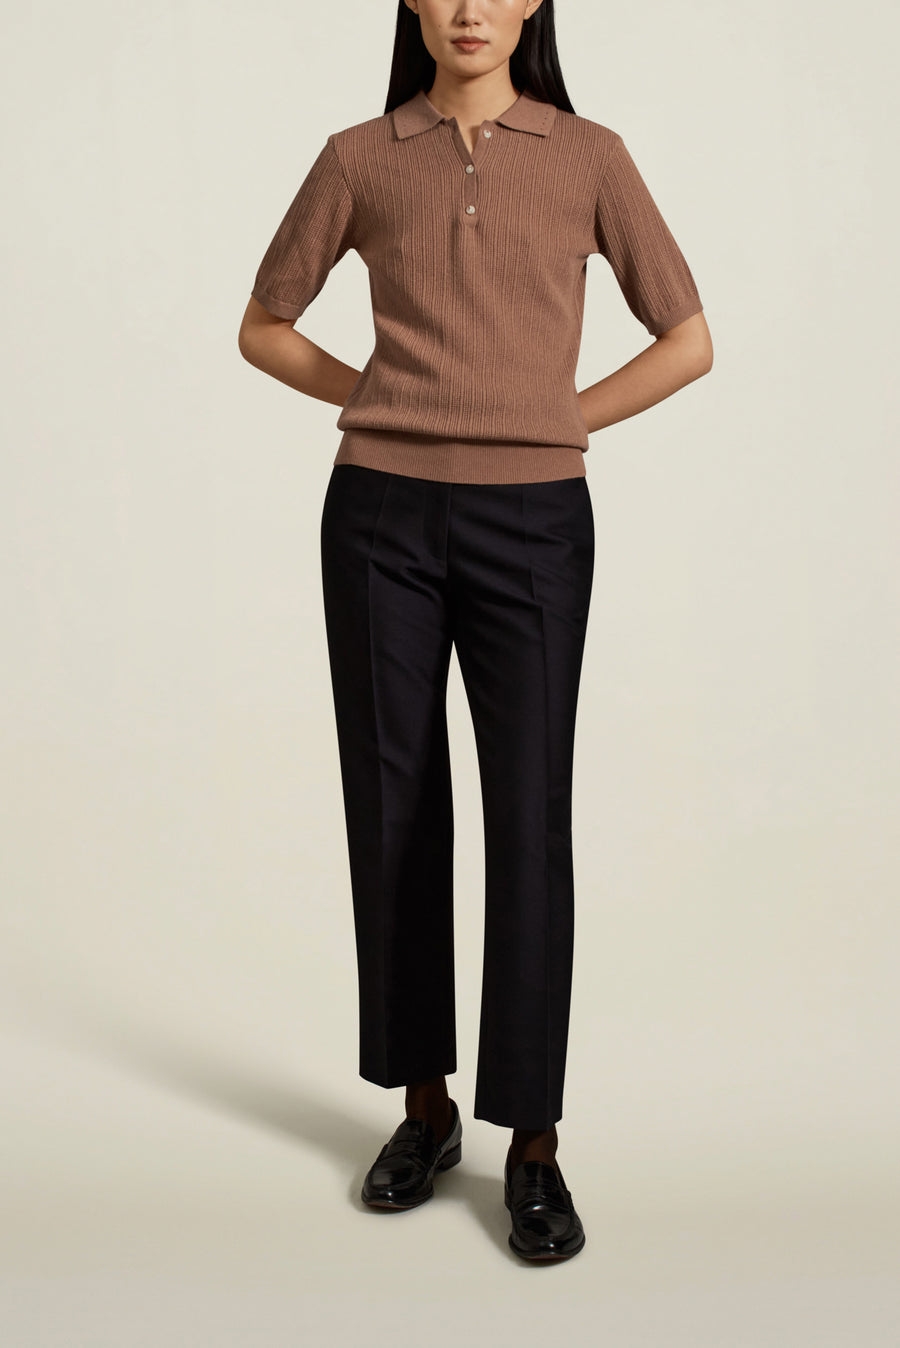 Mila Cashmere Polo in Camel Cashmere Wool Blend